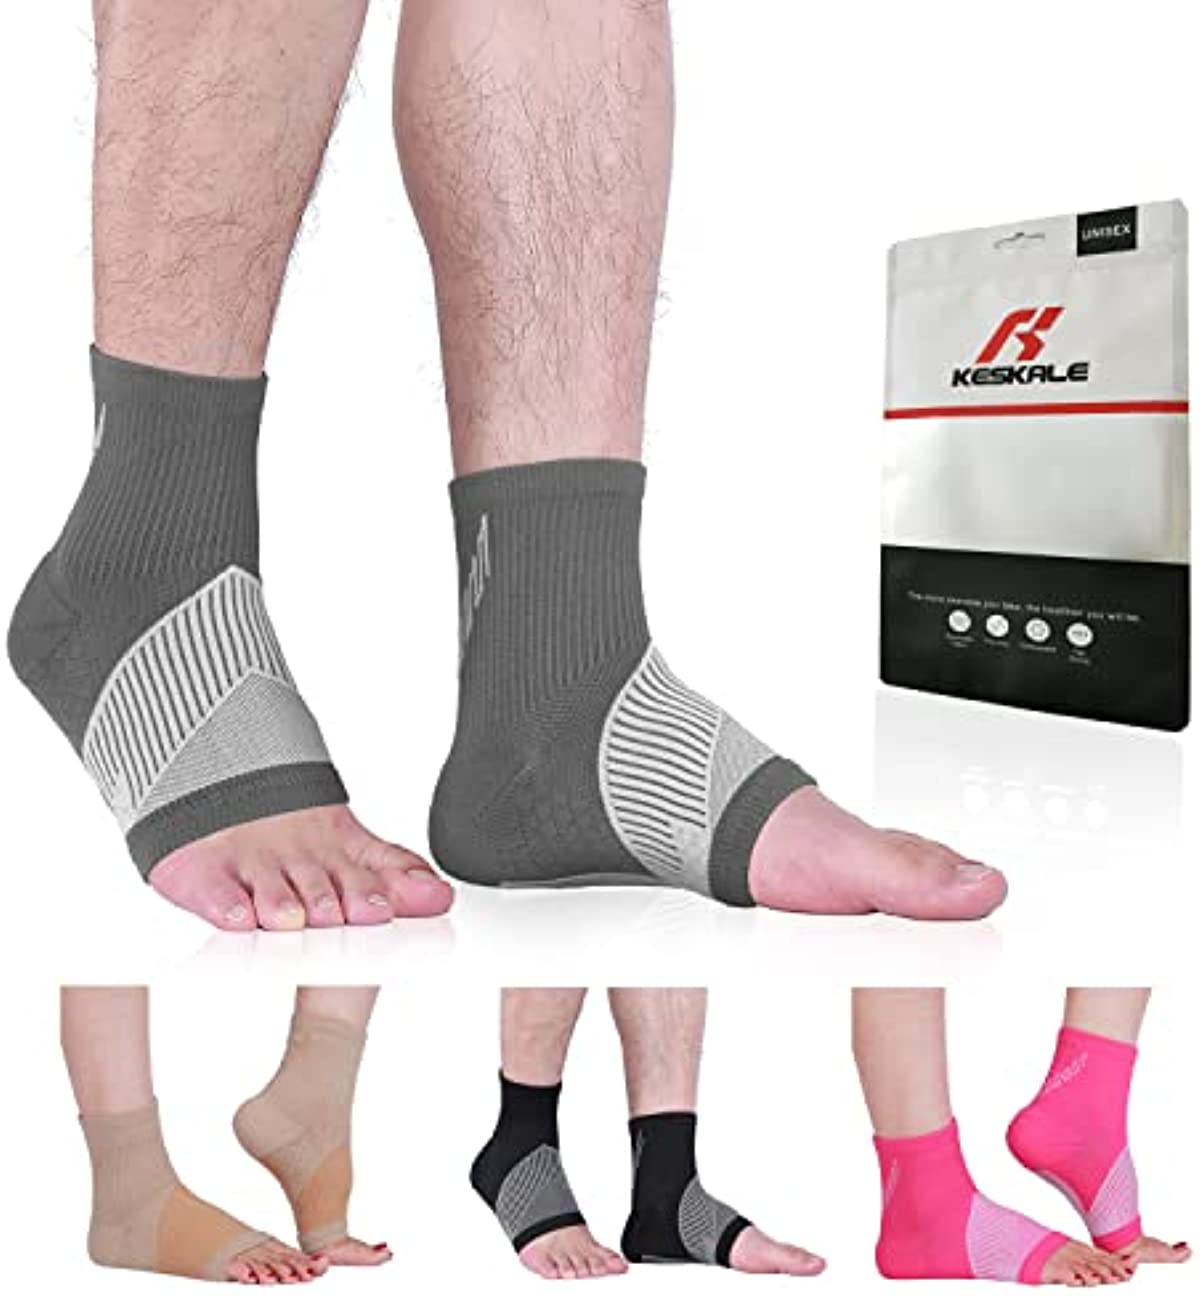 Ankle Compression Sleeve for Women Men (3 pairs), Ankle Support Brace Compression Socks for Plantar Fasciitis Swelling Pain Relief, Gray x 3pairs, Medium